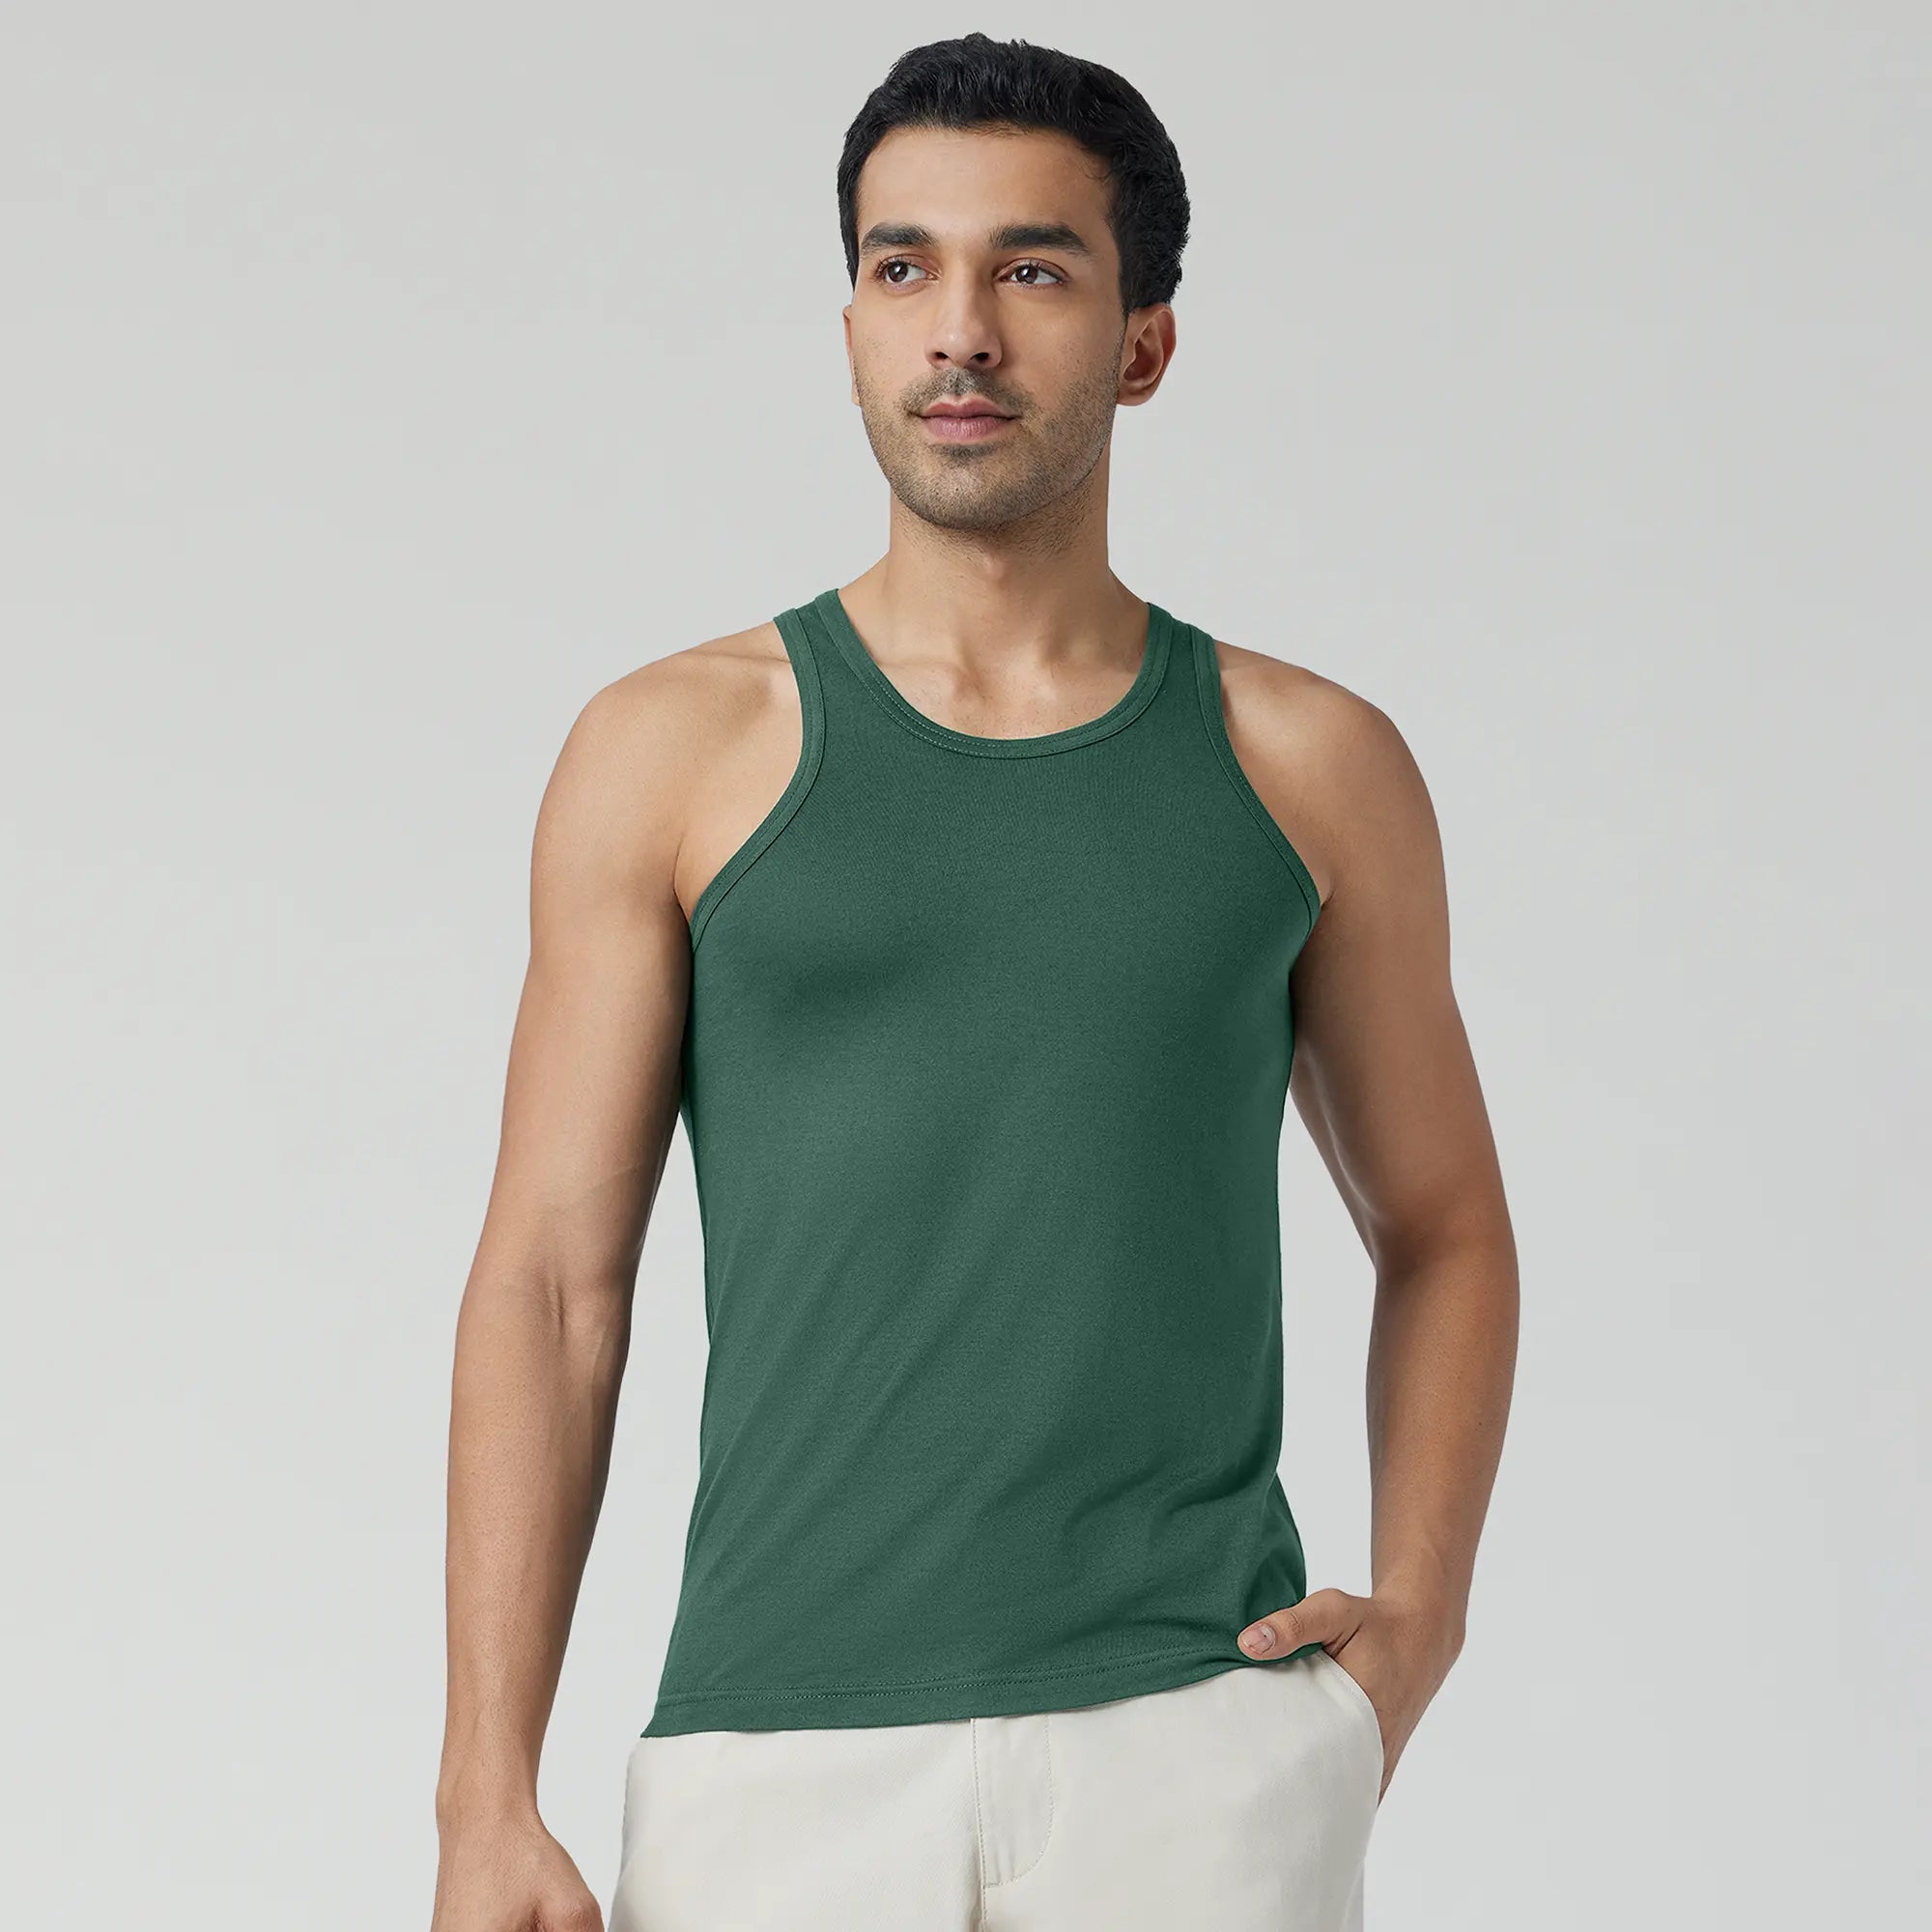 Ace Modal-Cotton Vests For Men Forest Green - XYXX Crew